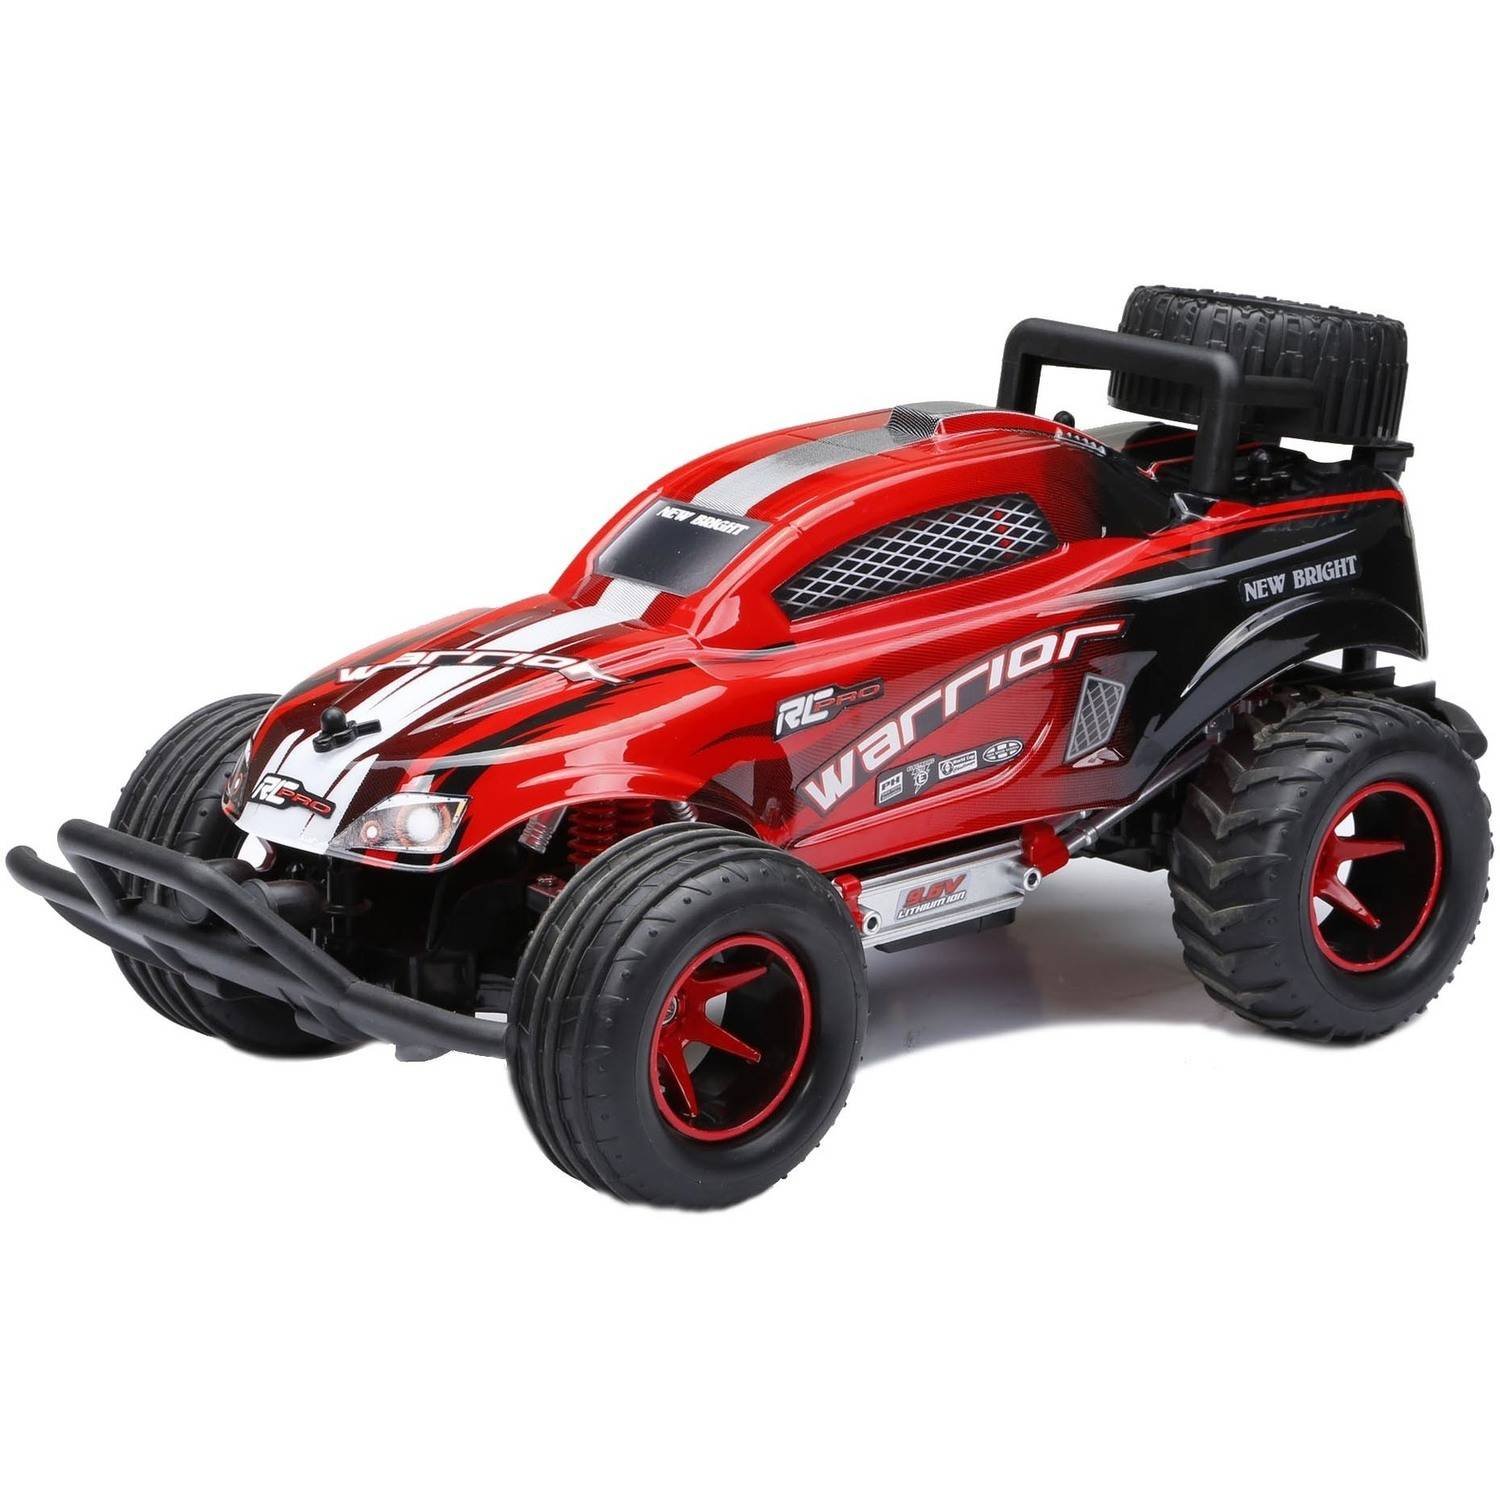 New Bright Pro Warrior Off-Road Full Function RC Car